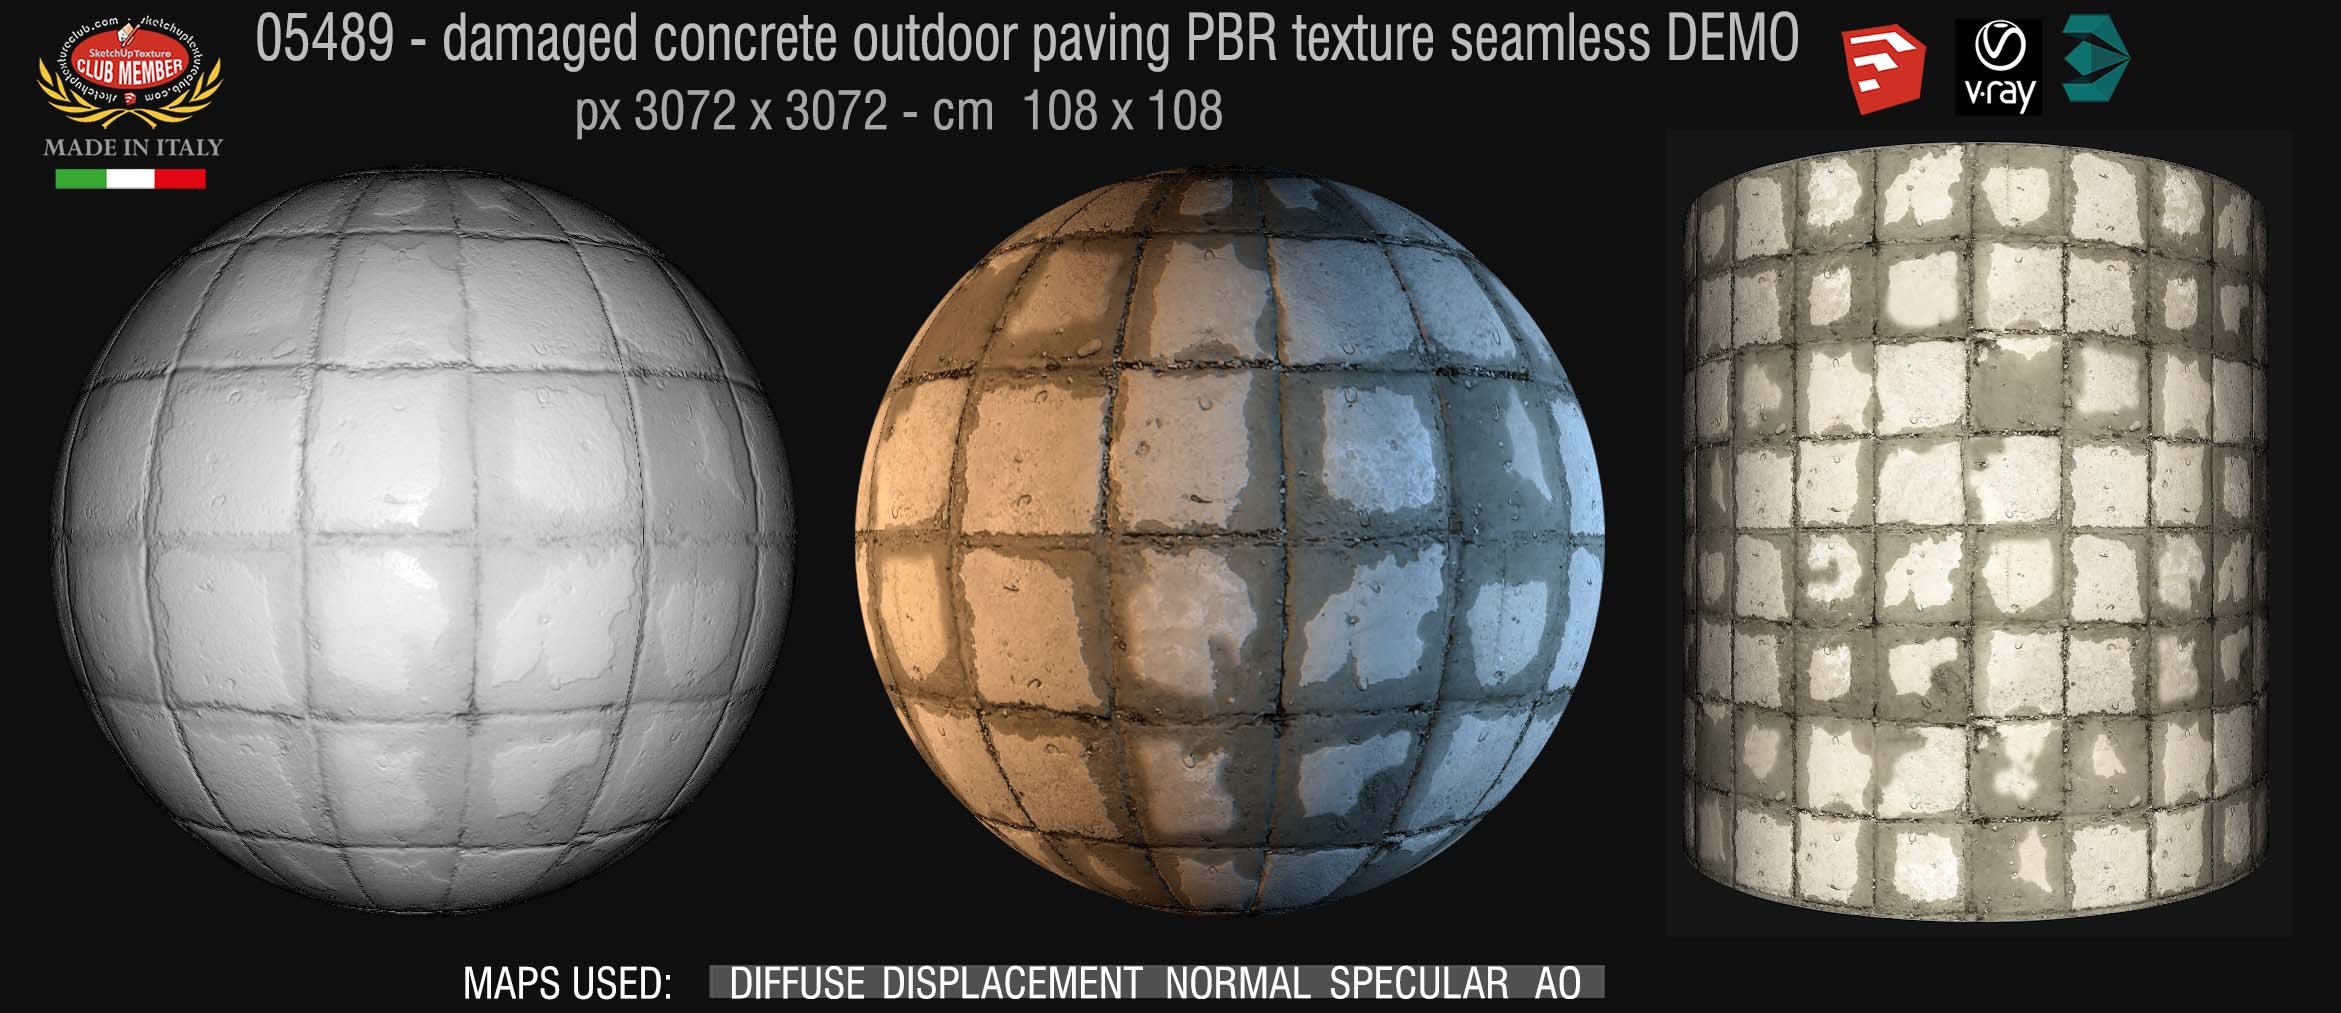 05489 Damaged concrete outdoor paving PBR texture seamless DEMO